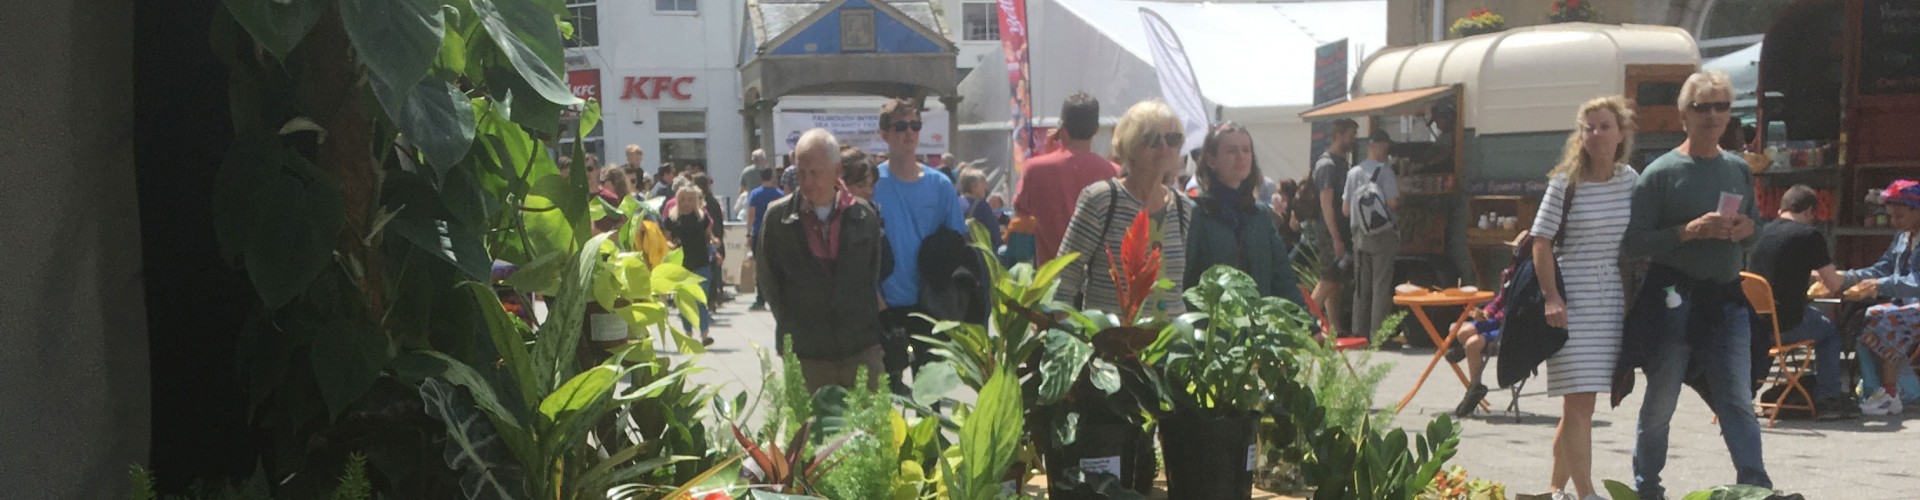 plant stall at outdoor market on falmouth moor